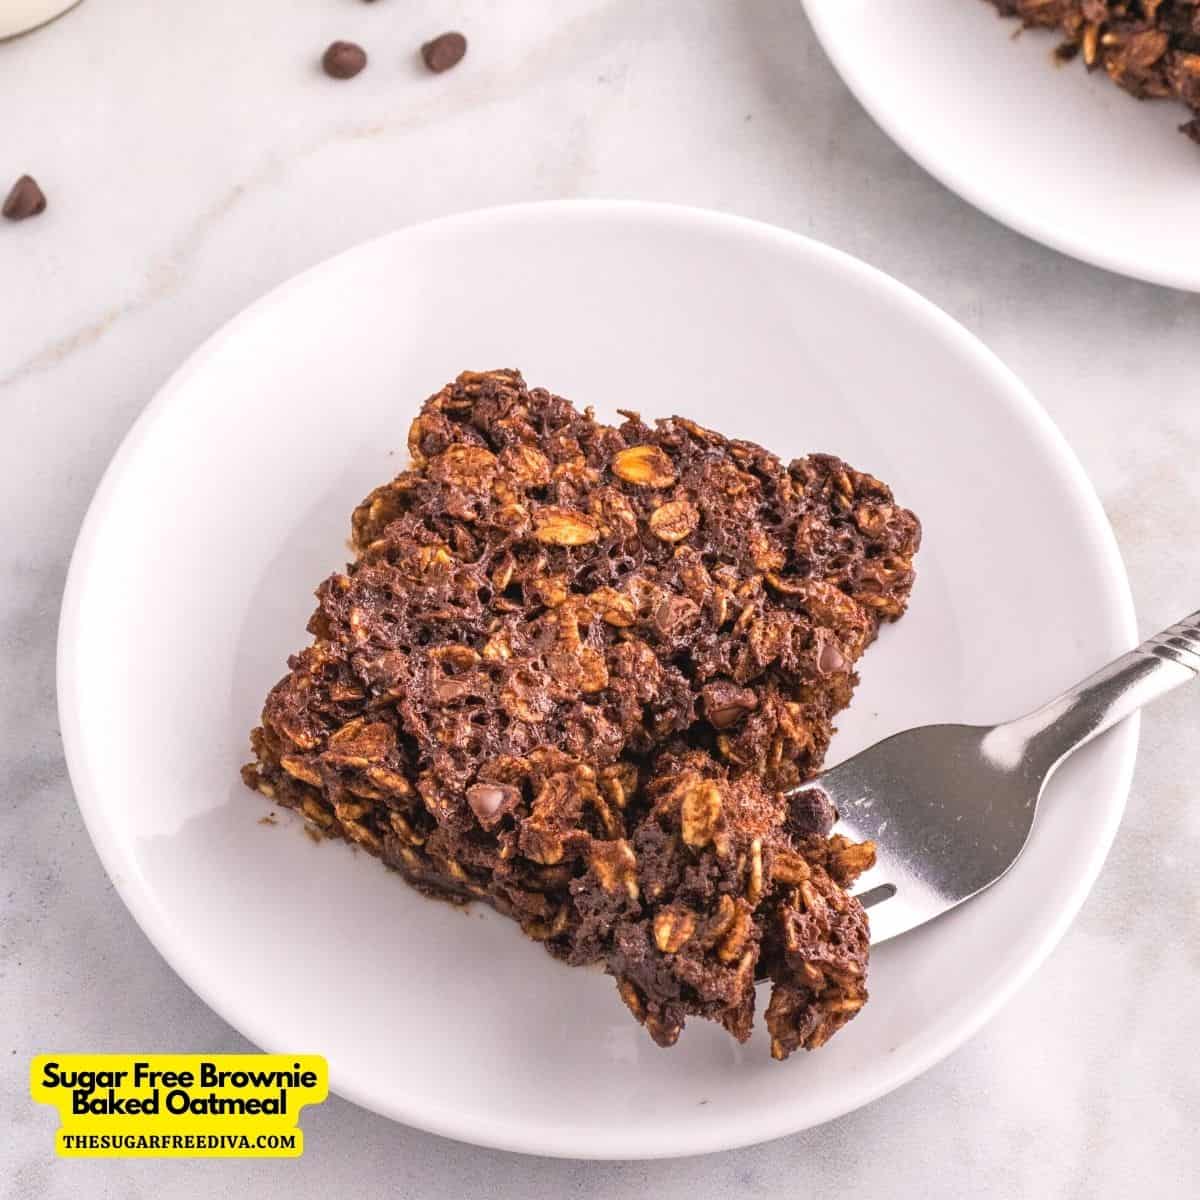 Sugar Free Brownie Baked Oatmeal, a simple and delicious breakfast or brunch recipe made with oatmeal, apple sauce, and no added sugar.